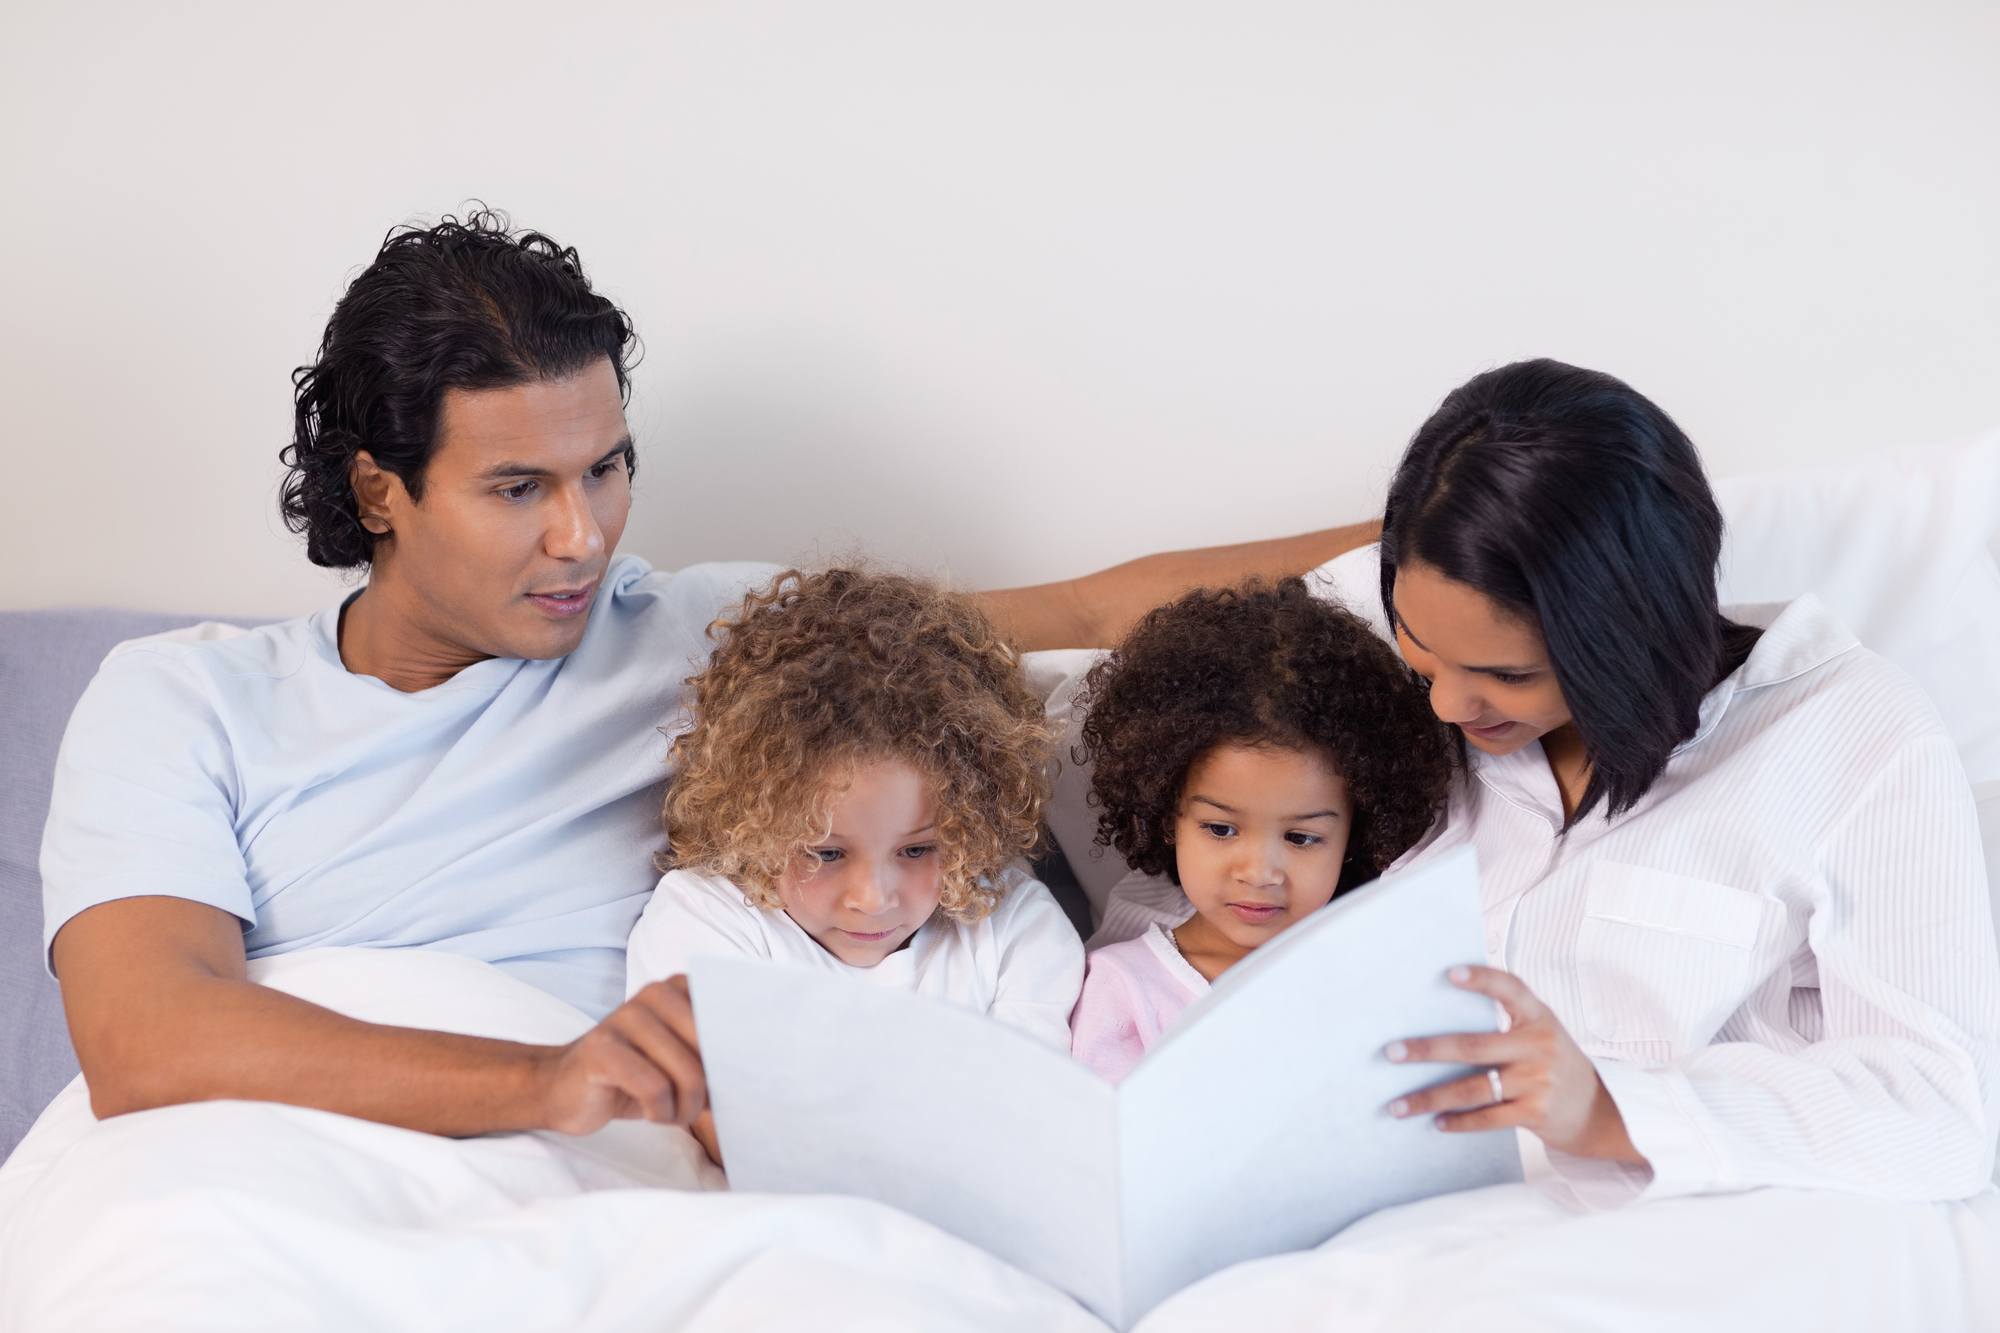 Try to arrive before bedtime to establish good sleep habits when traveling with children